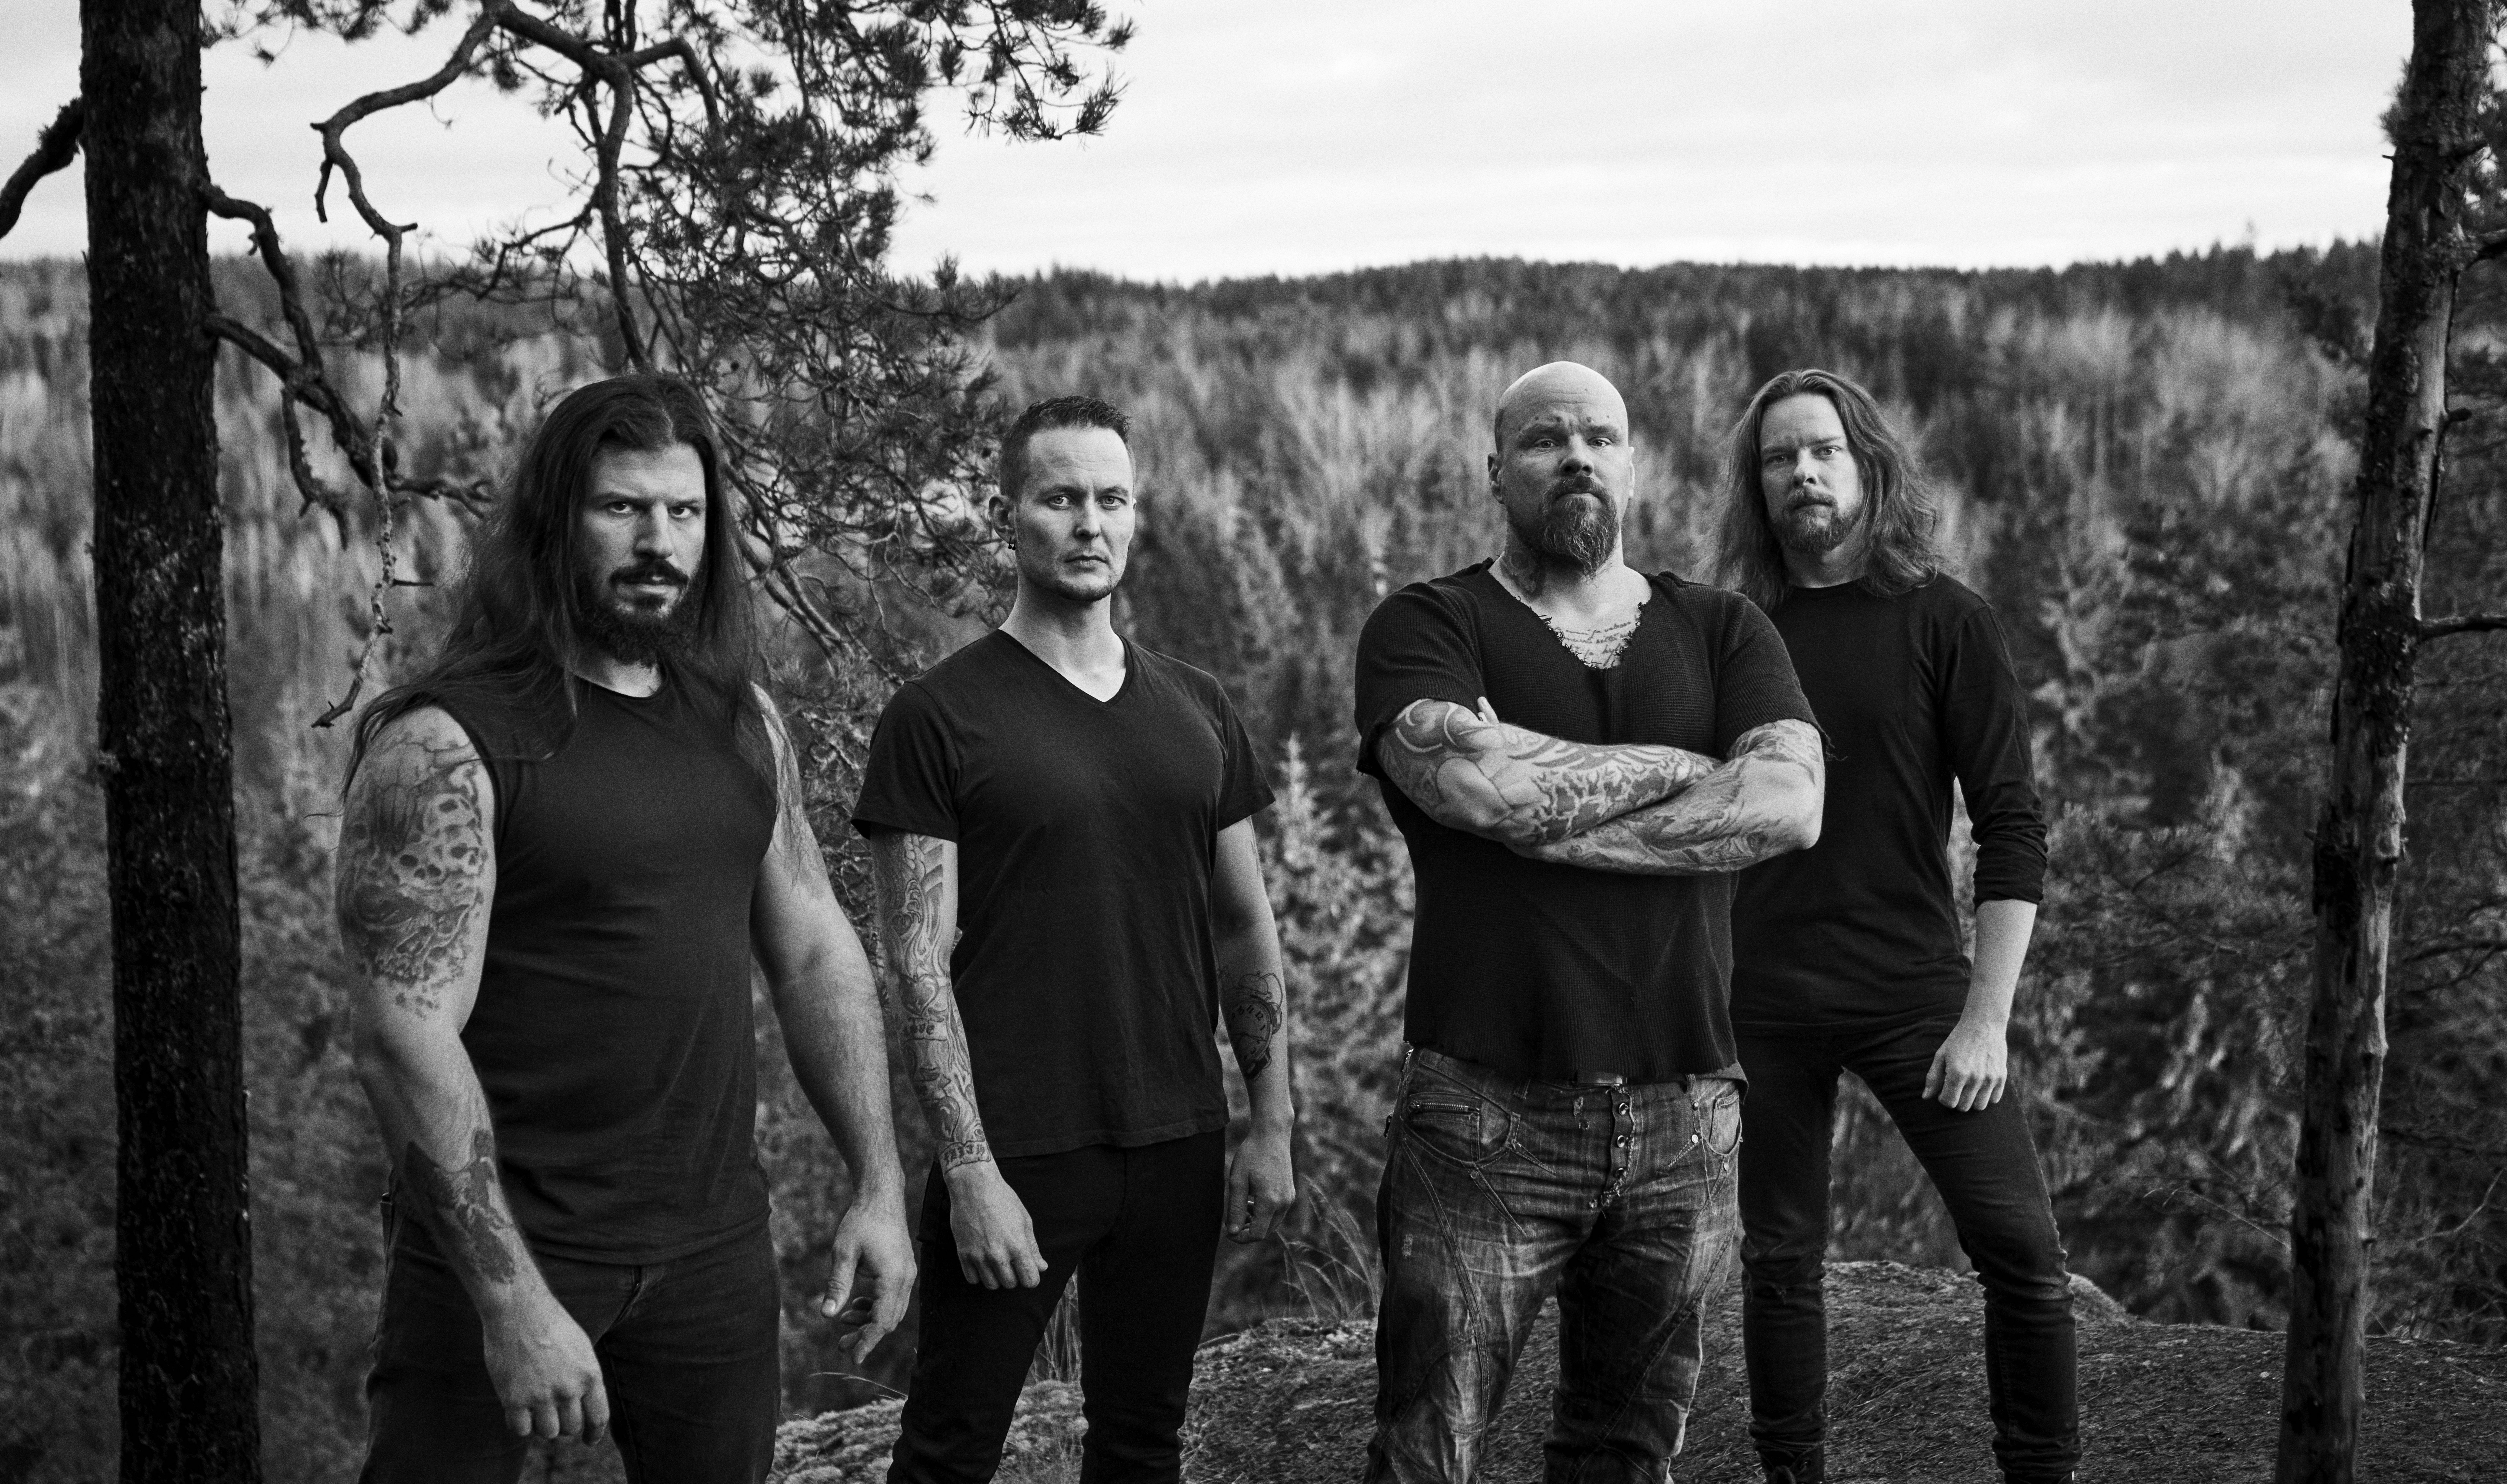 “Nature is just so much stronger in the end” – Interview with Tuomas Saukkonen from Wolfheart about their new album